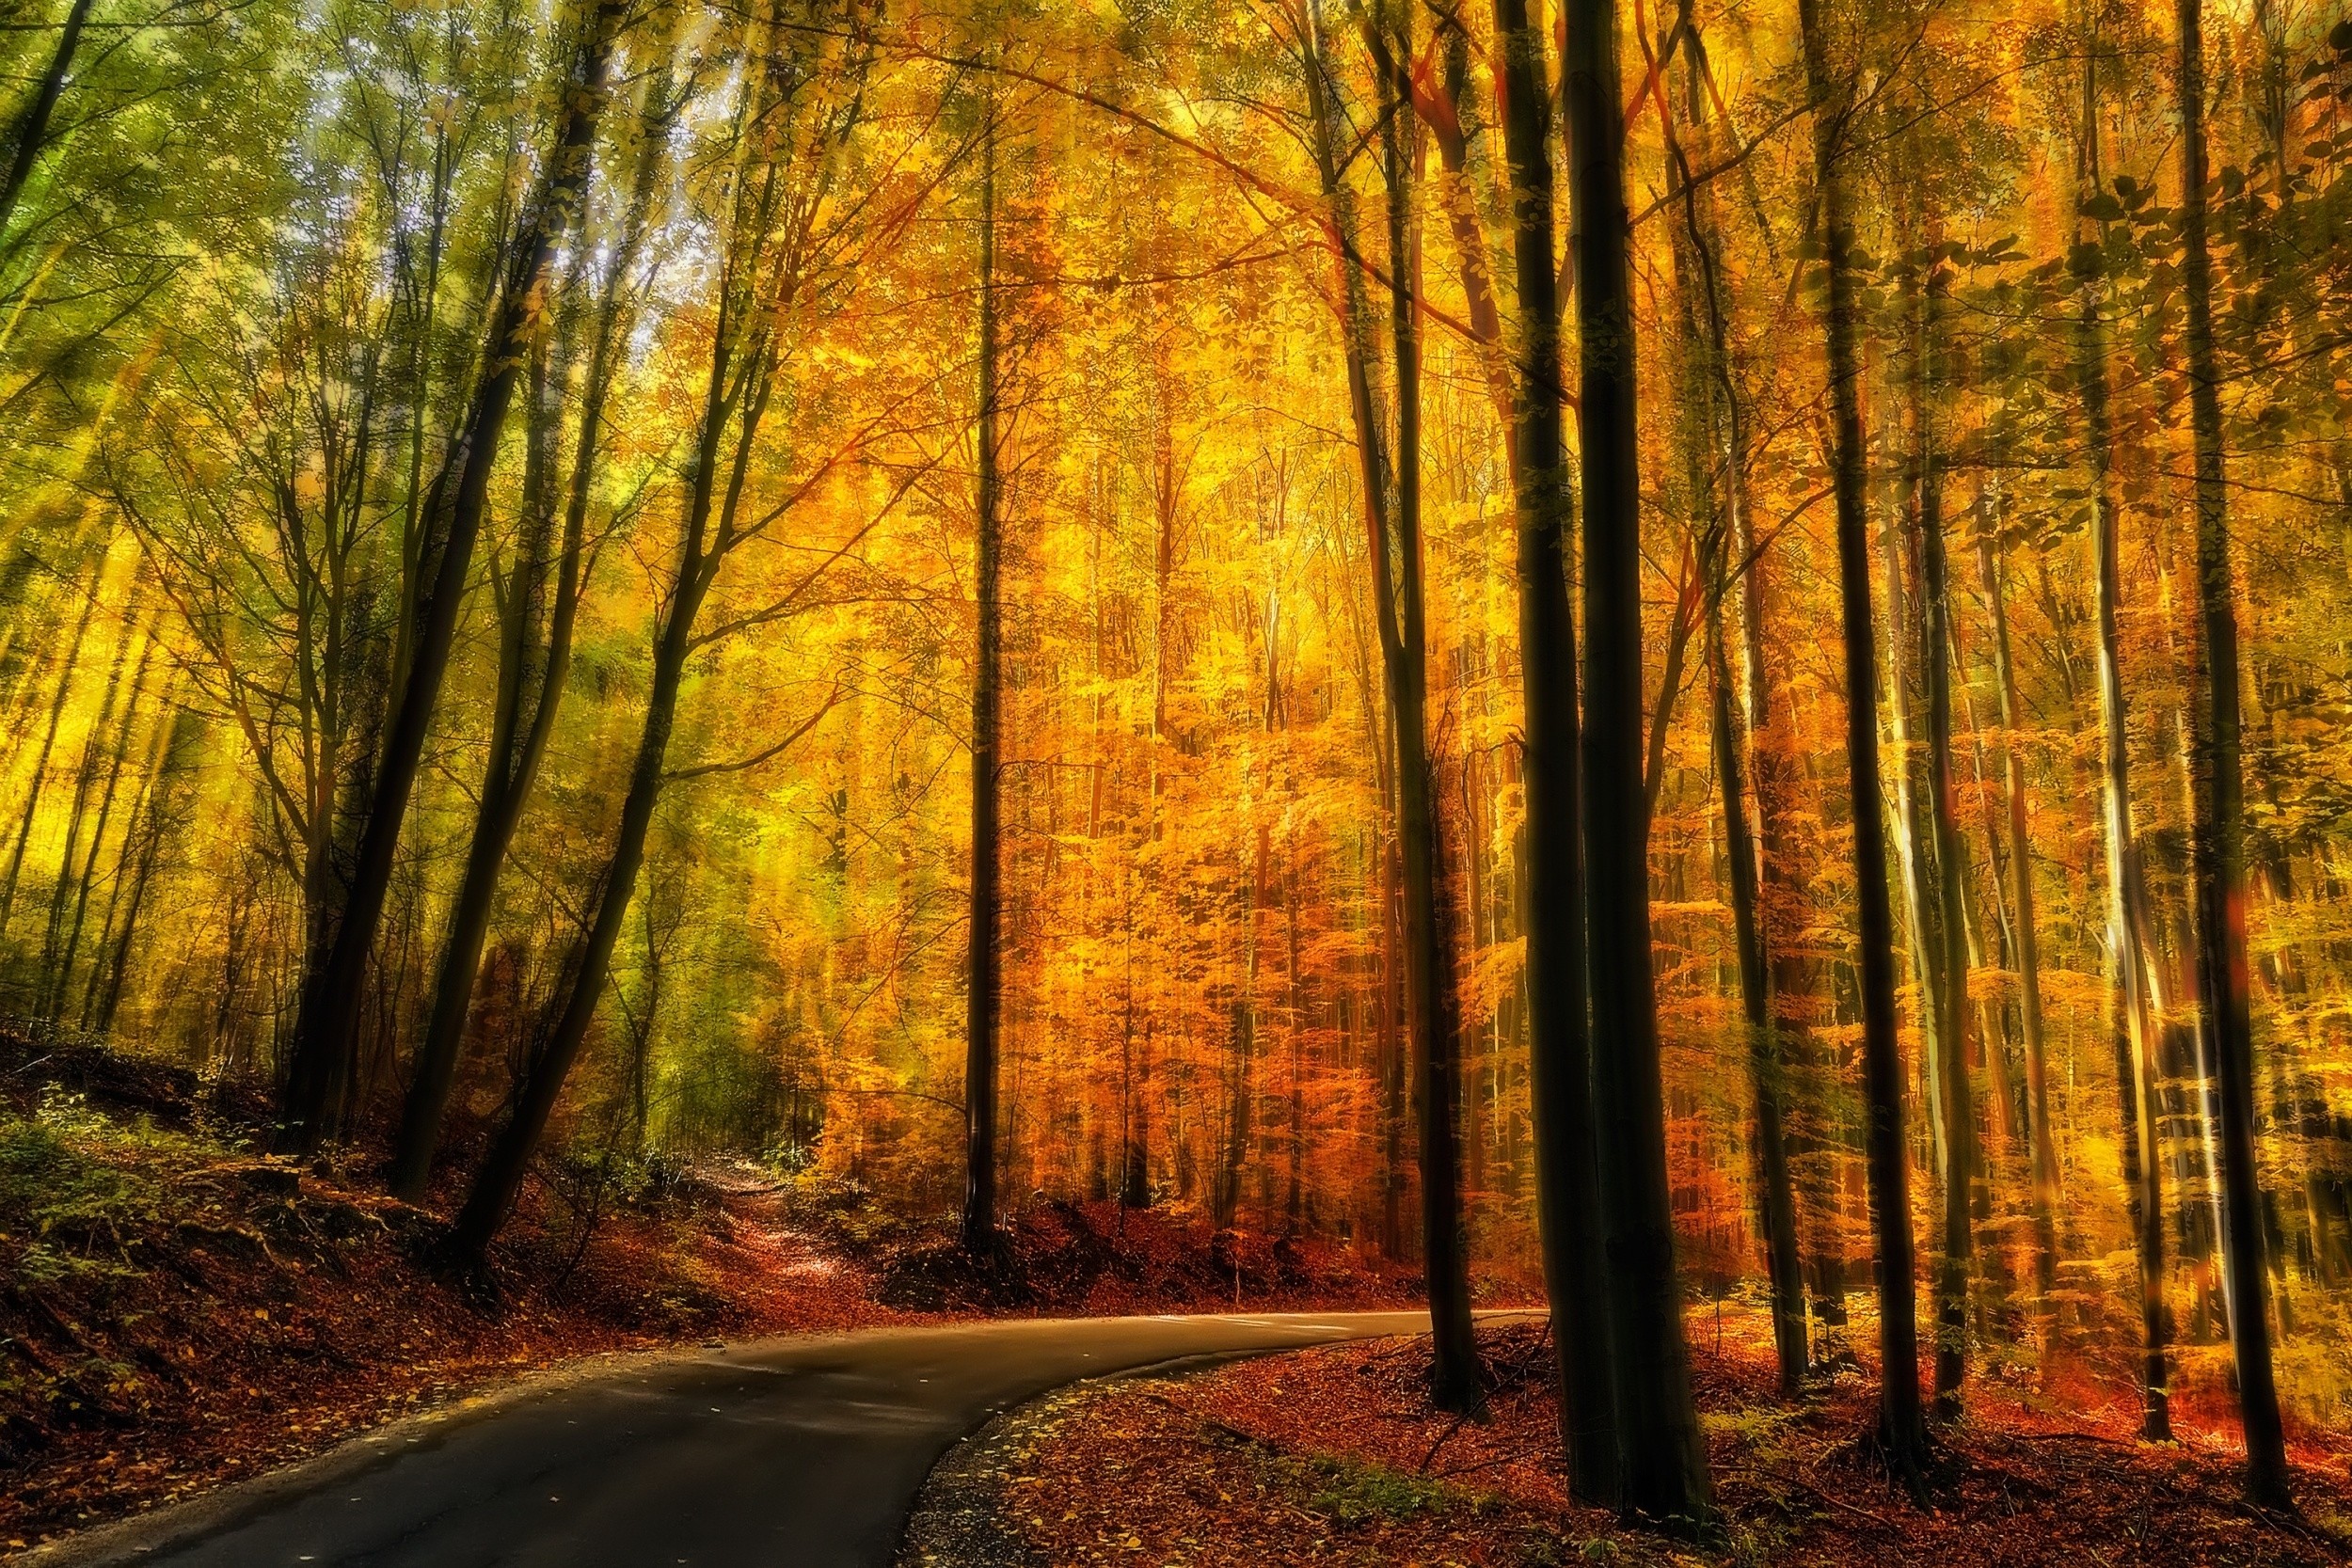 General 2500x1667 nature fall forest road path yellow trees sunlight